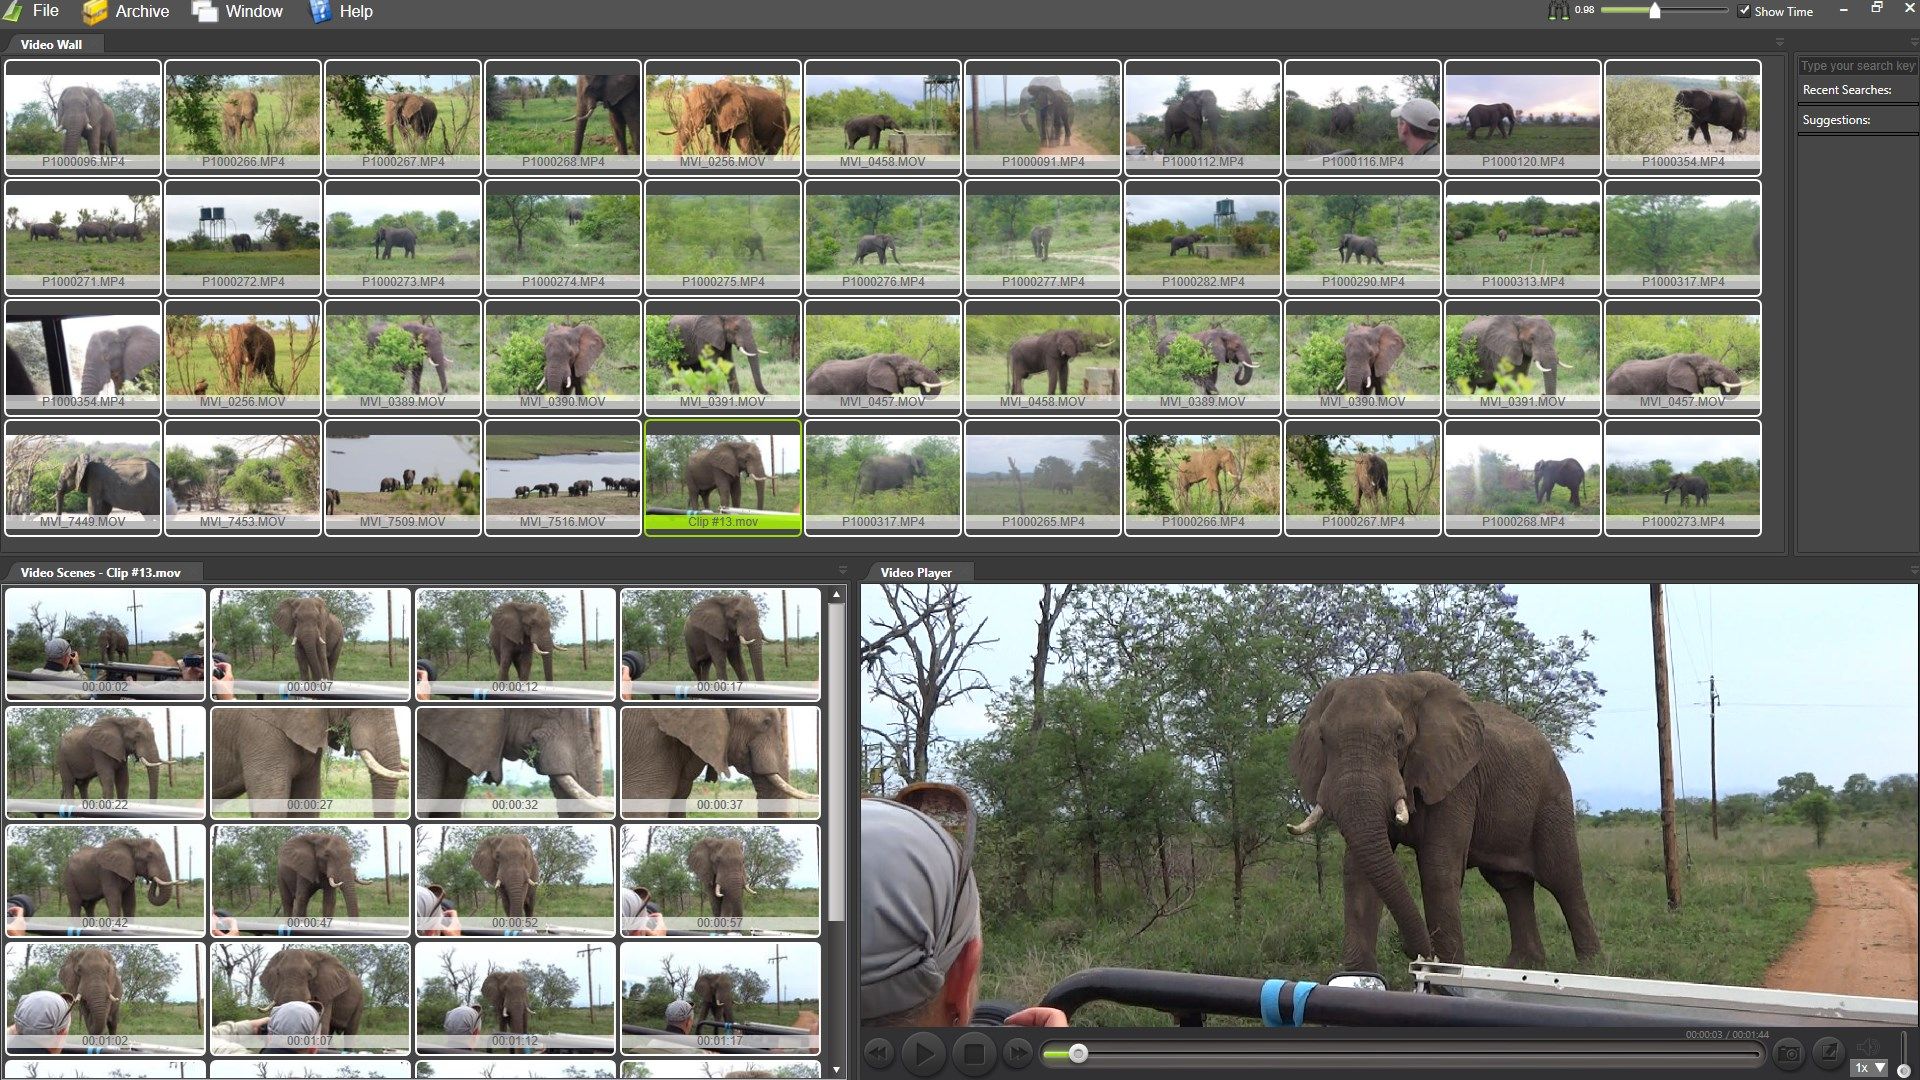 Video Wall filtered on Elephant keyworded videos